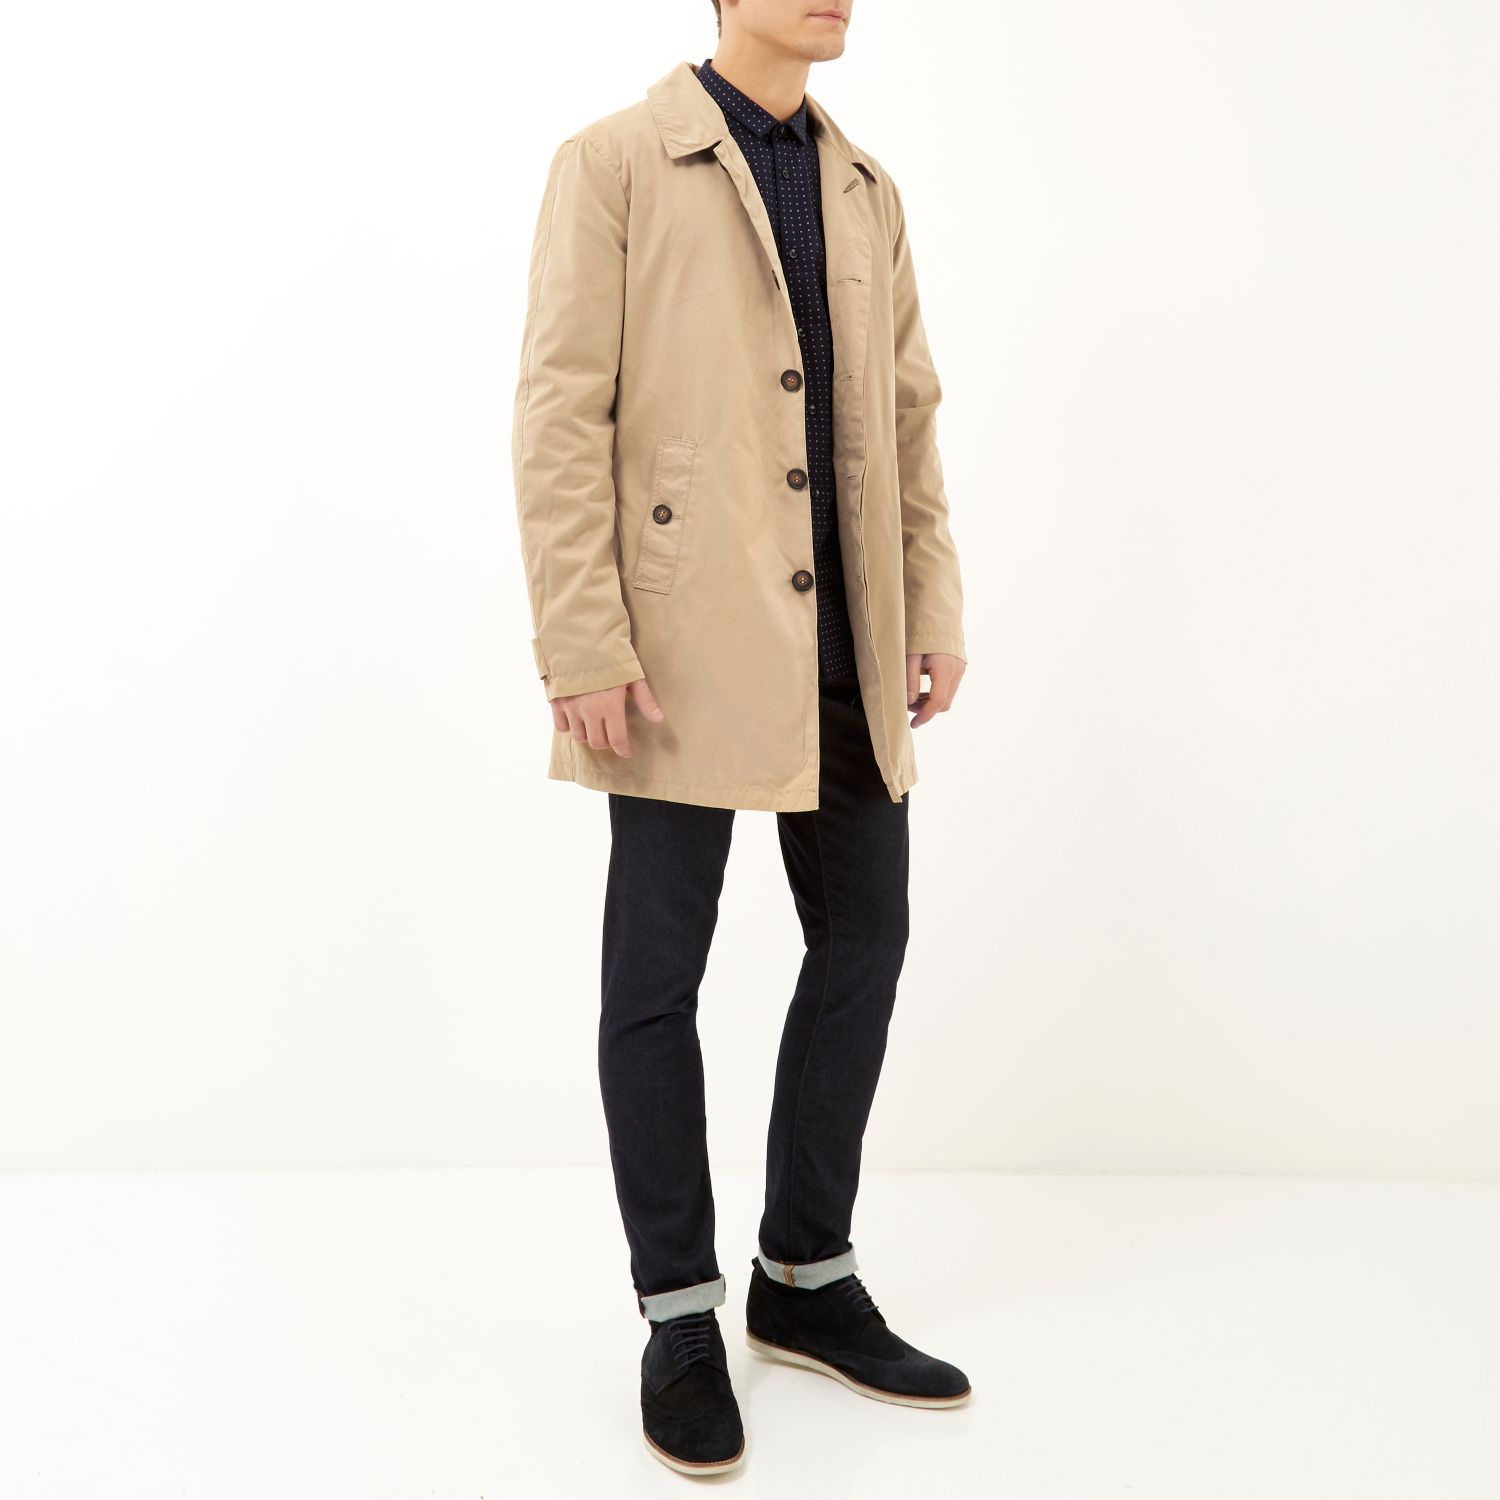 River Island Beige Only & Sons Trench Coat in Natural for Men - Lyst